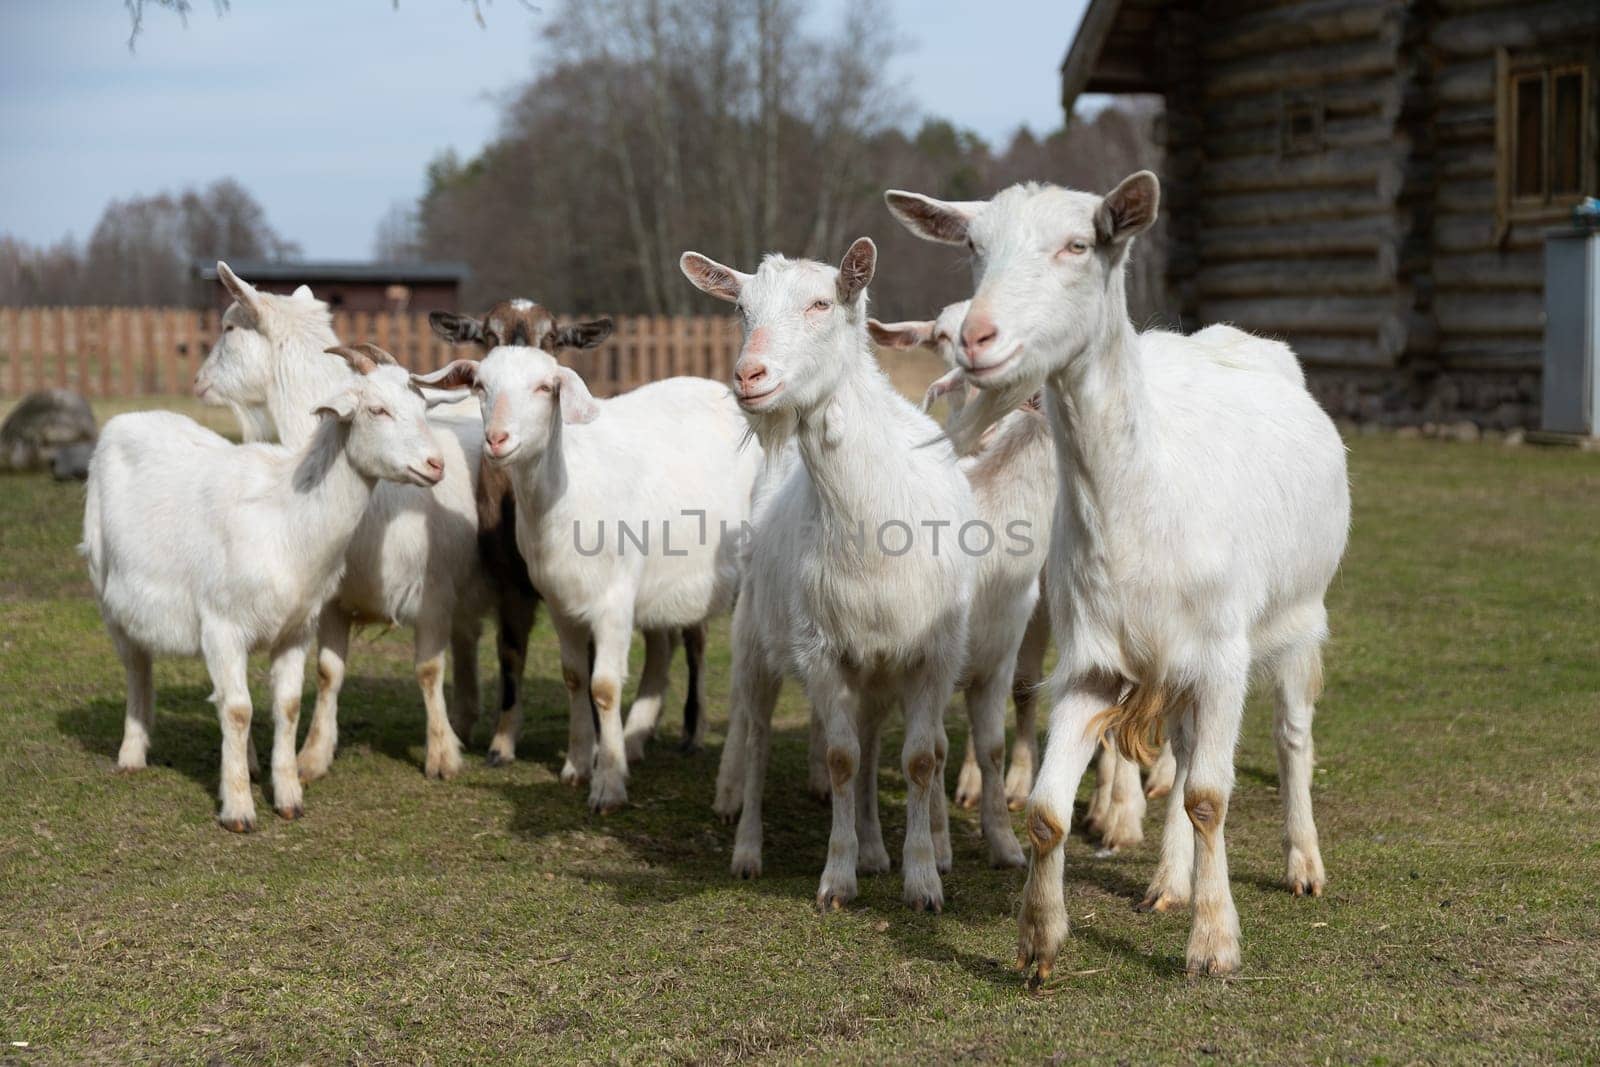 A group of white goats congregated on a lush green field, their hooves pressed against the soft grass. The goats are looking around, some nibbling on the grass, others simply observing their surroundings.